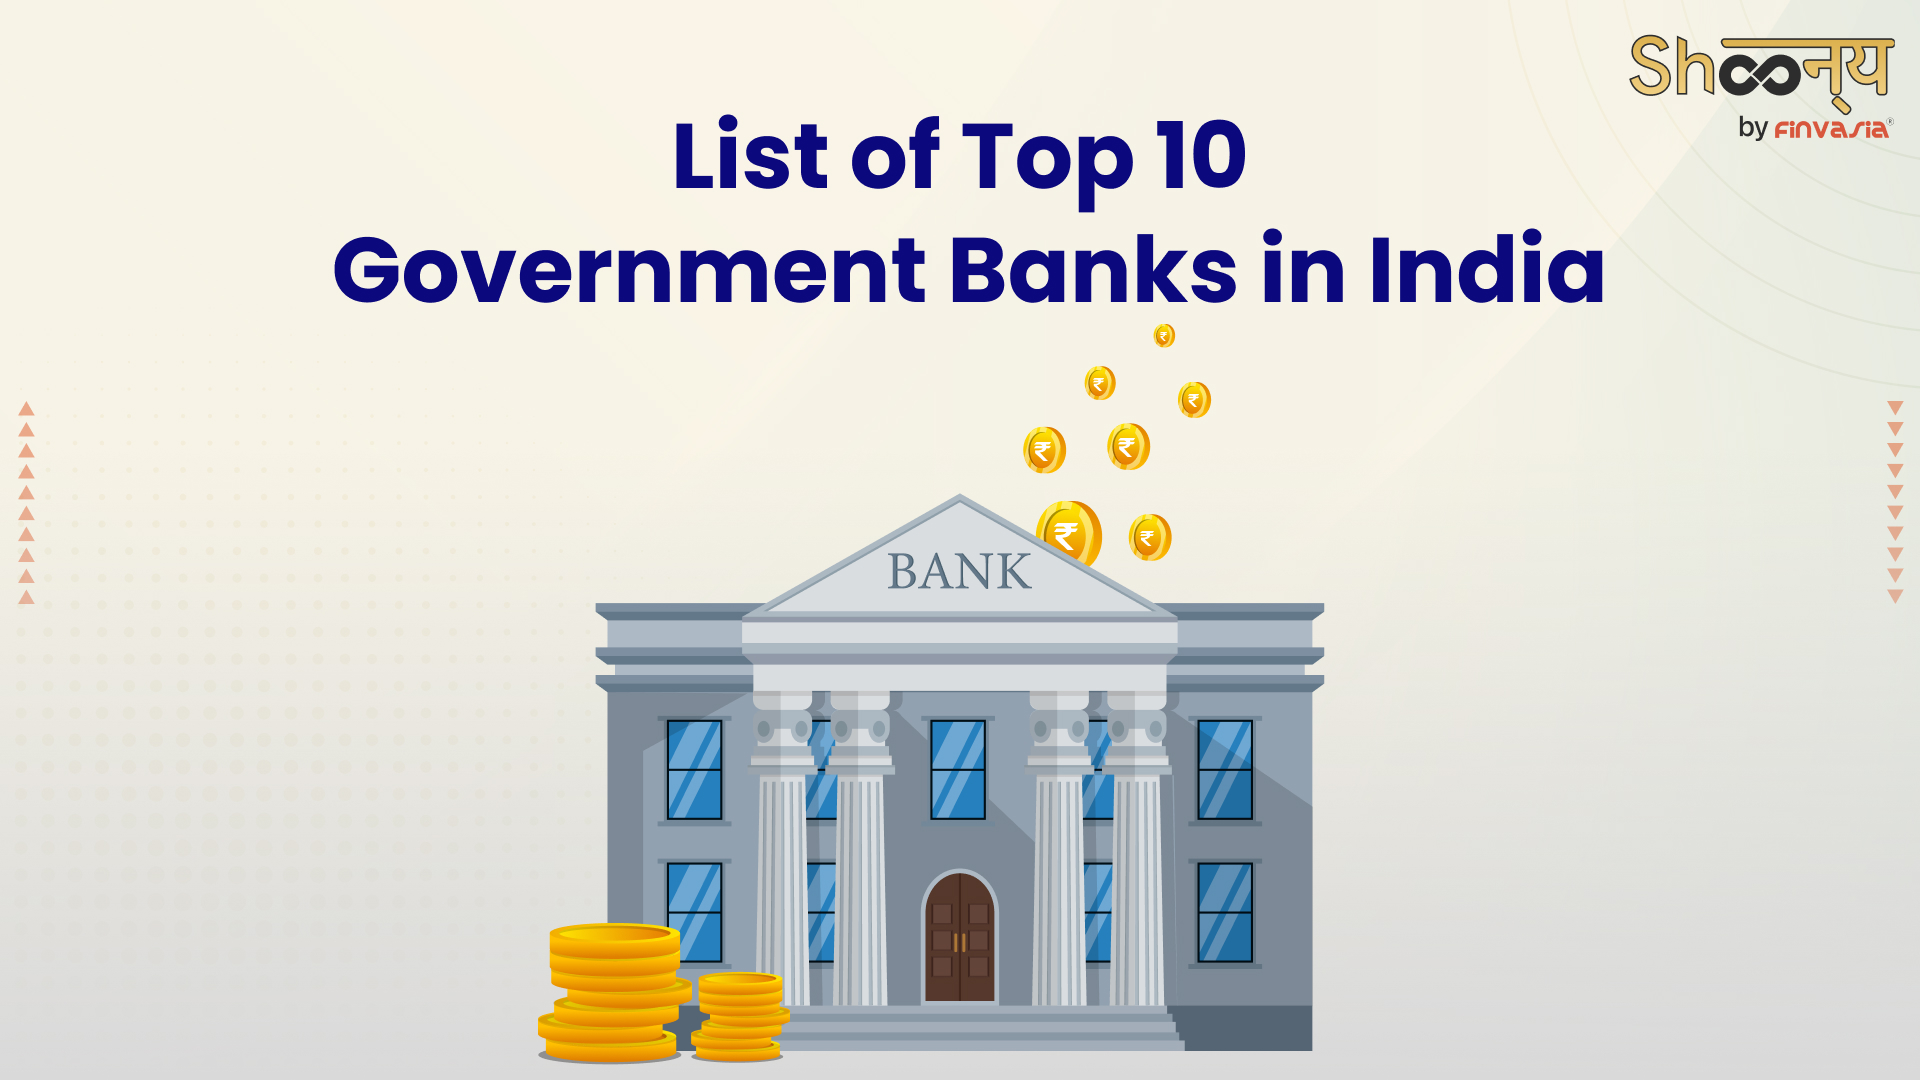 Top 10 Government Banks in India